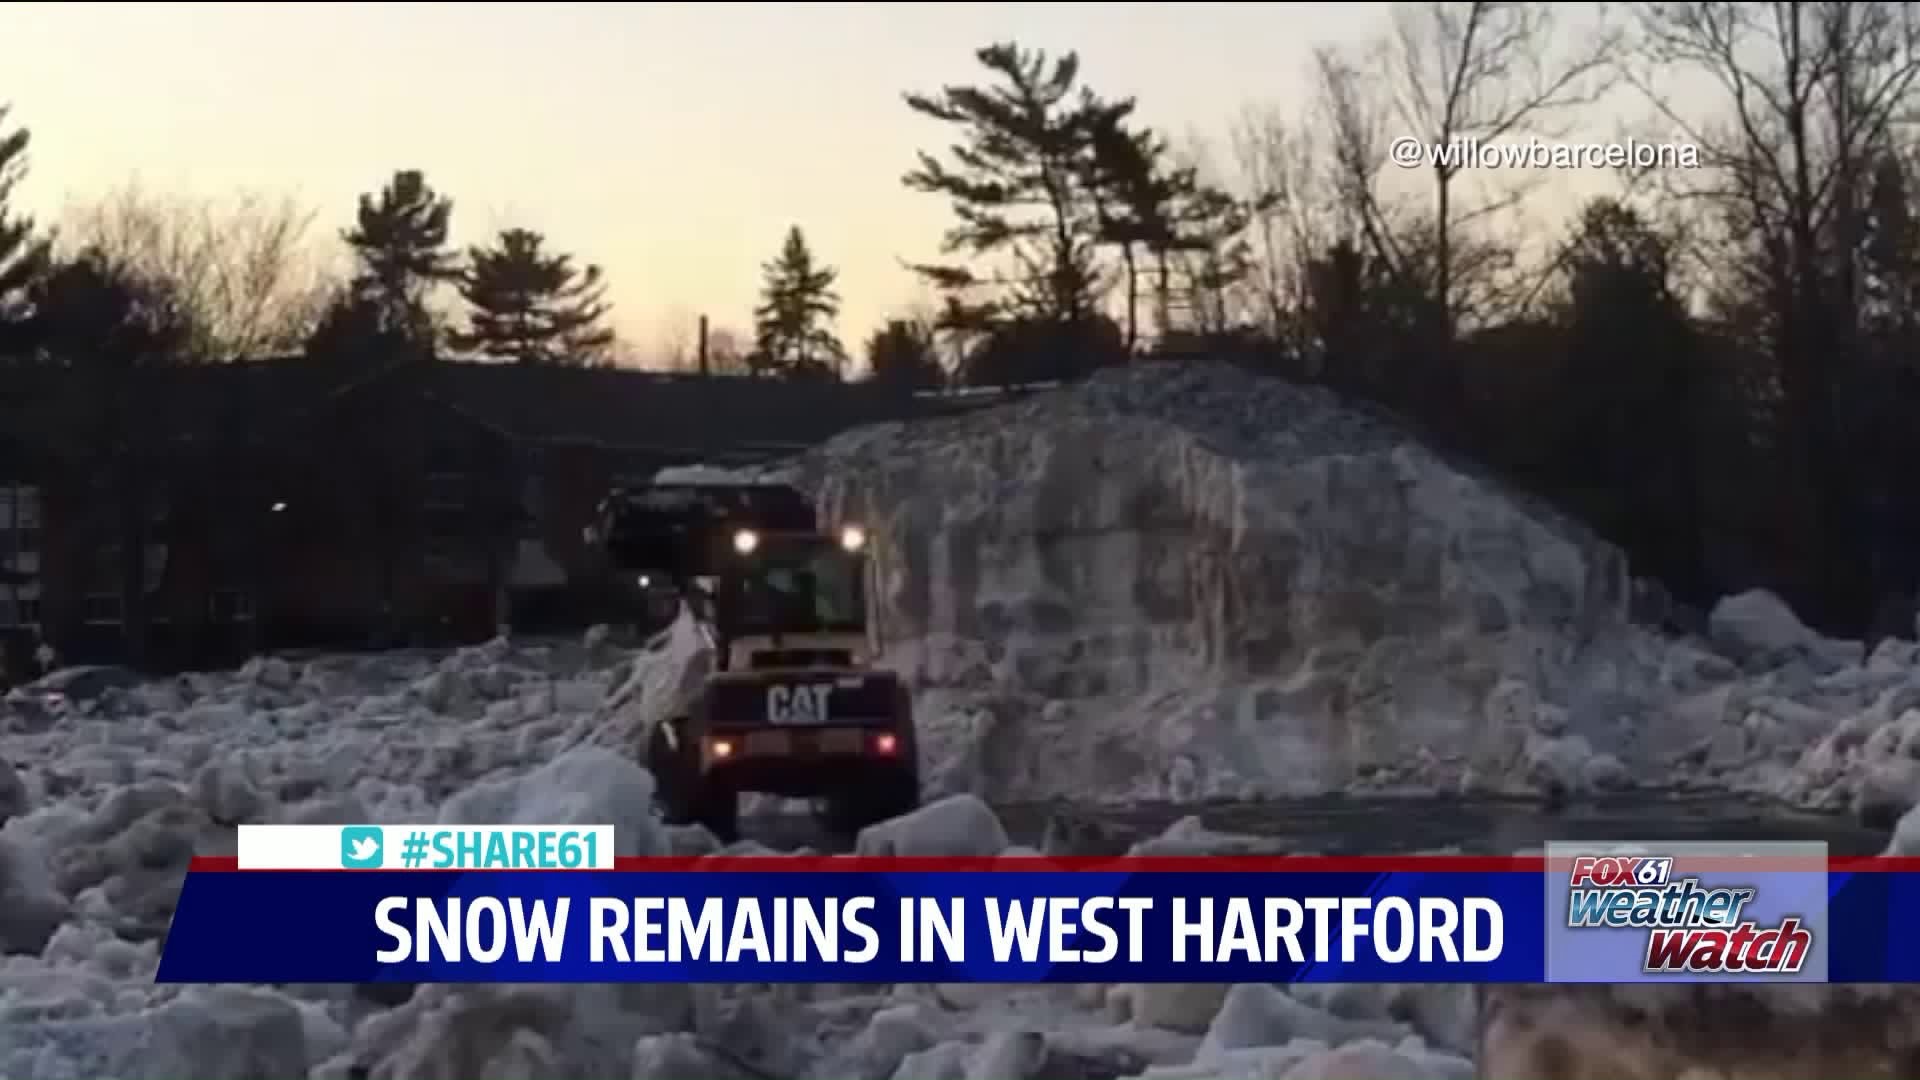 Snow remains in West Hartford